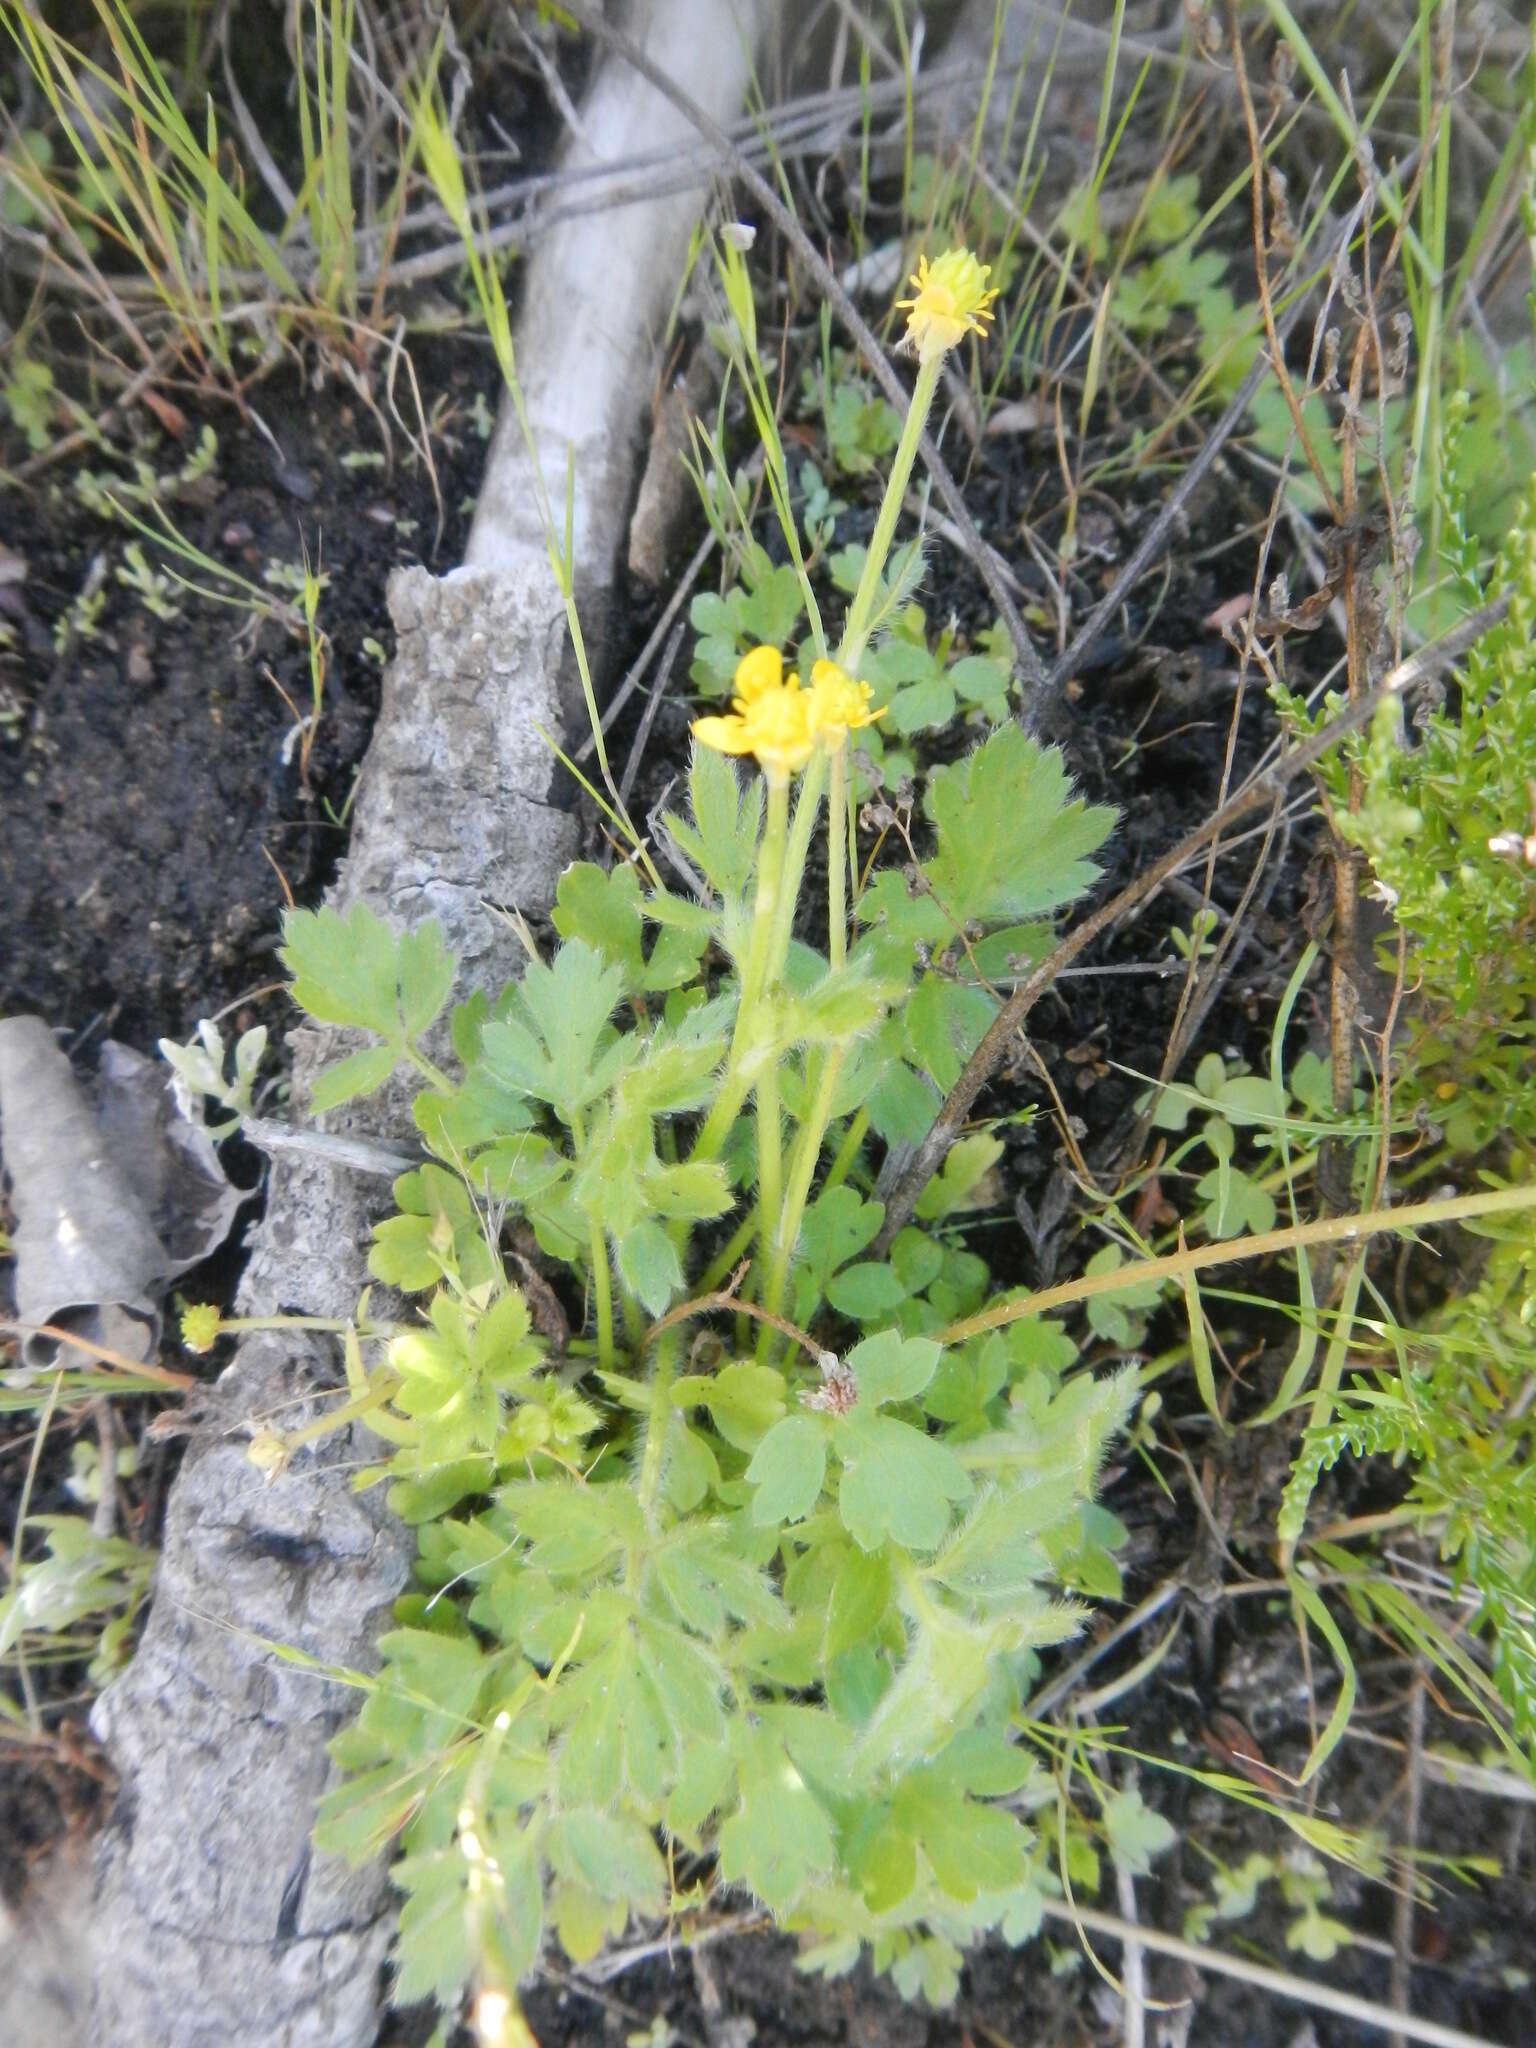 Image of Common buttercup